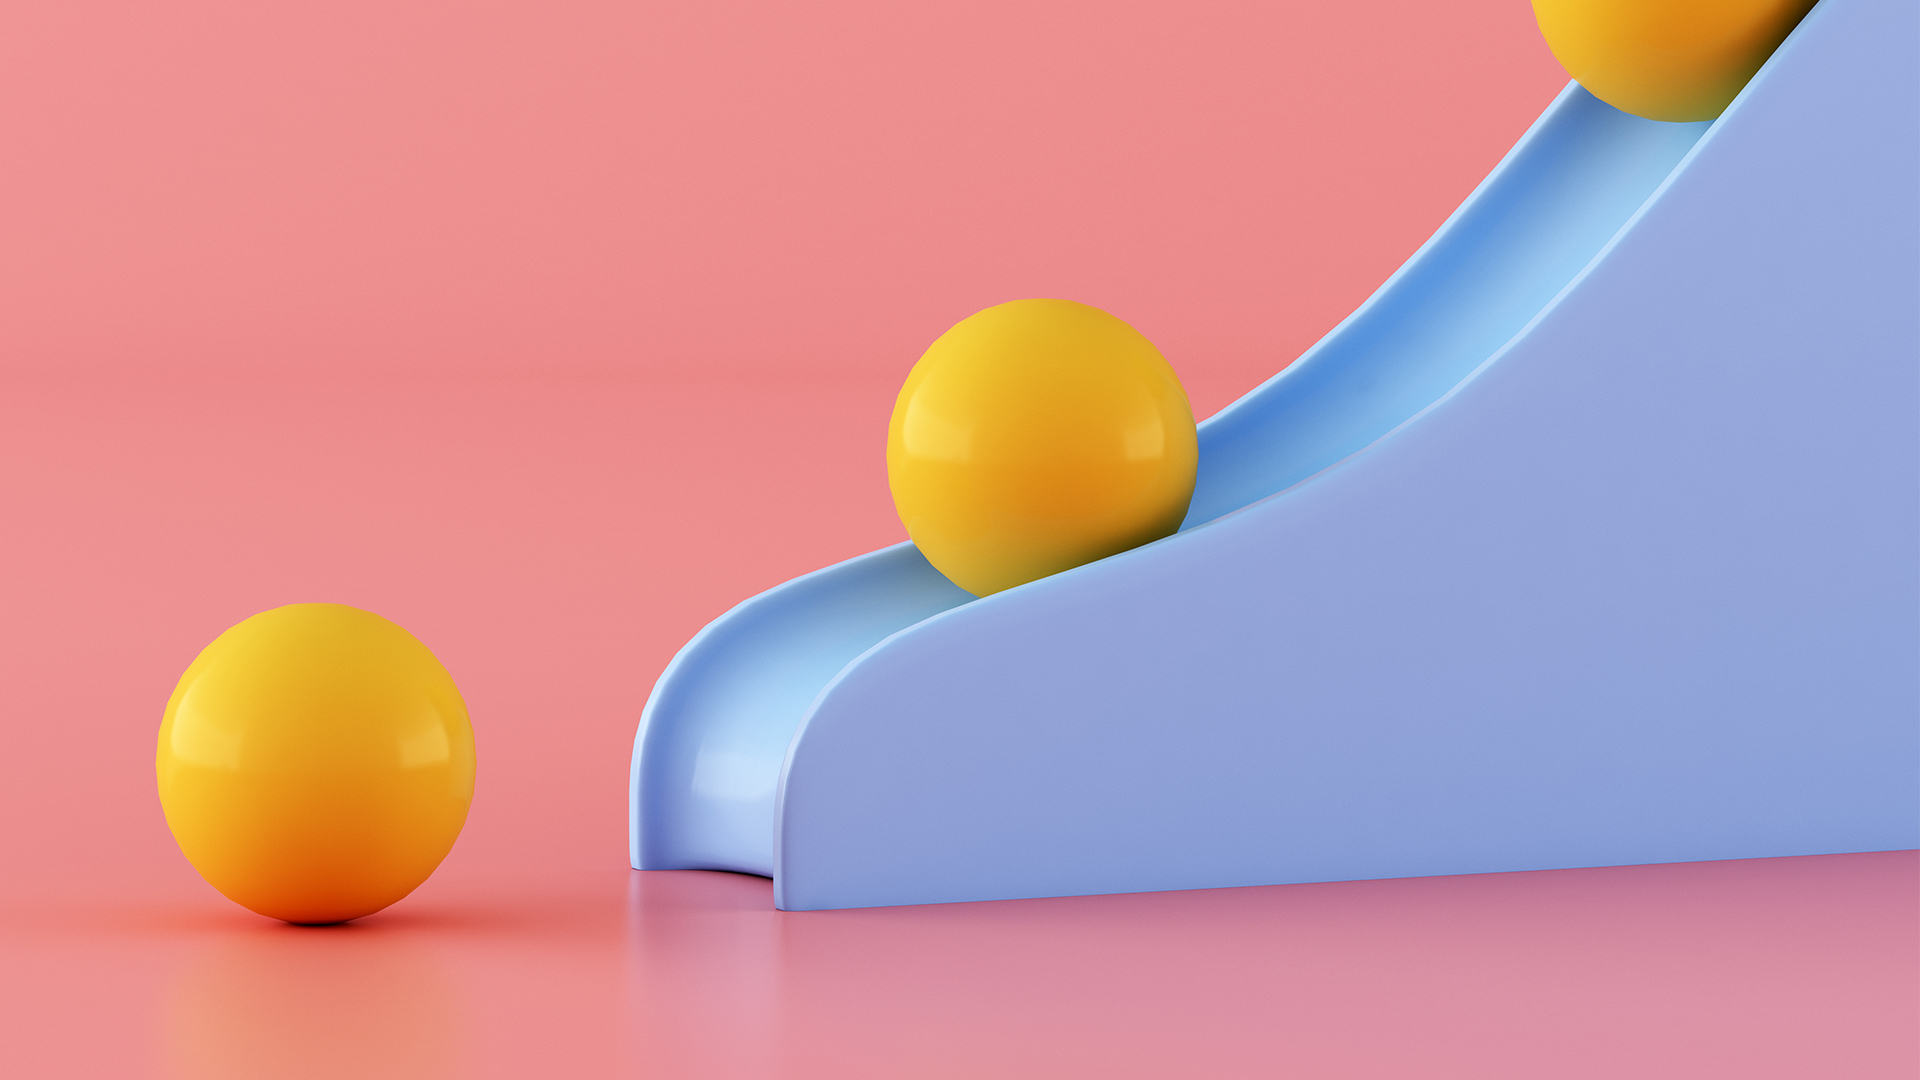 Yellow balls coming down a blue slide on a pink backgrund